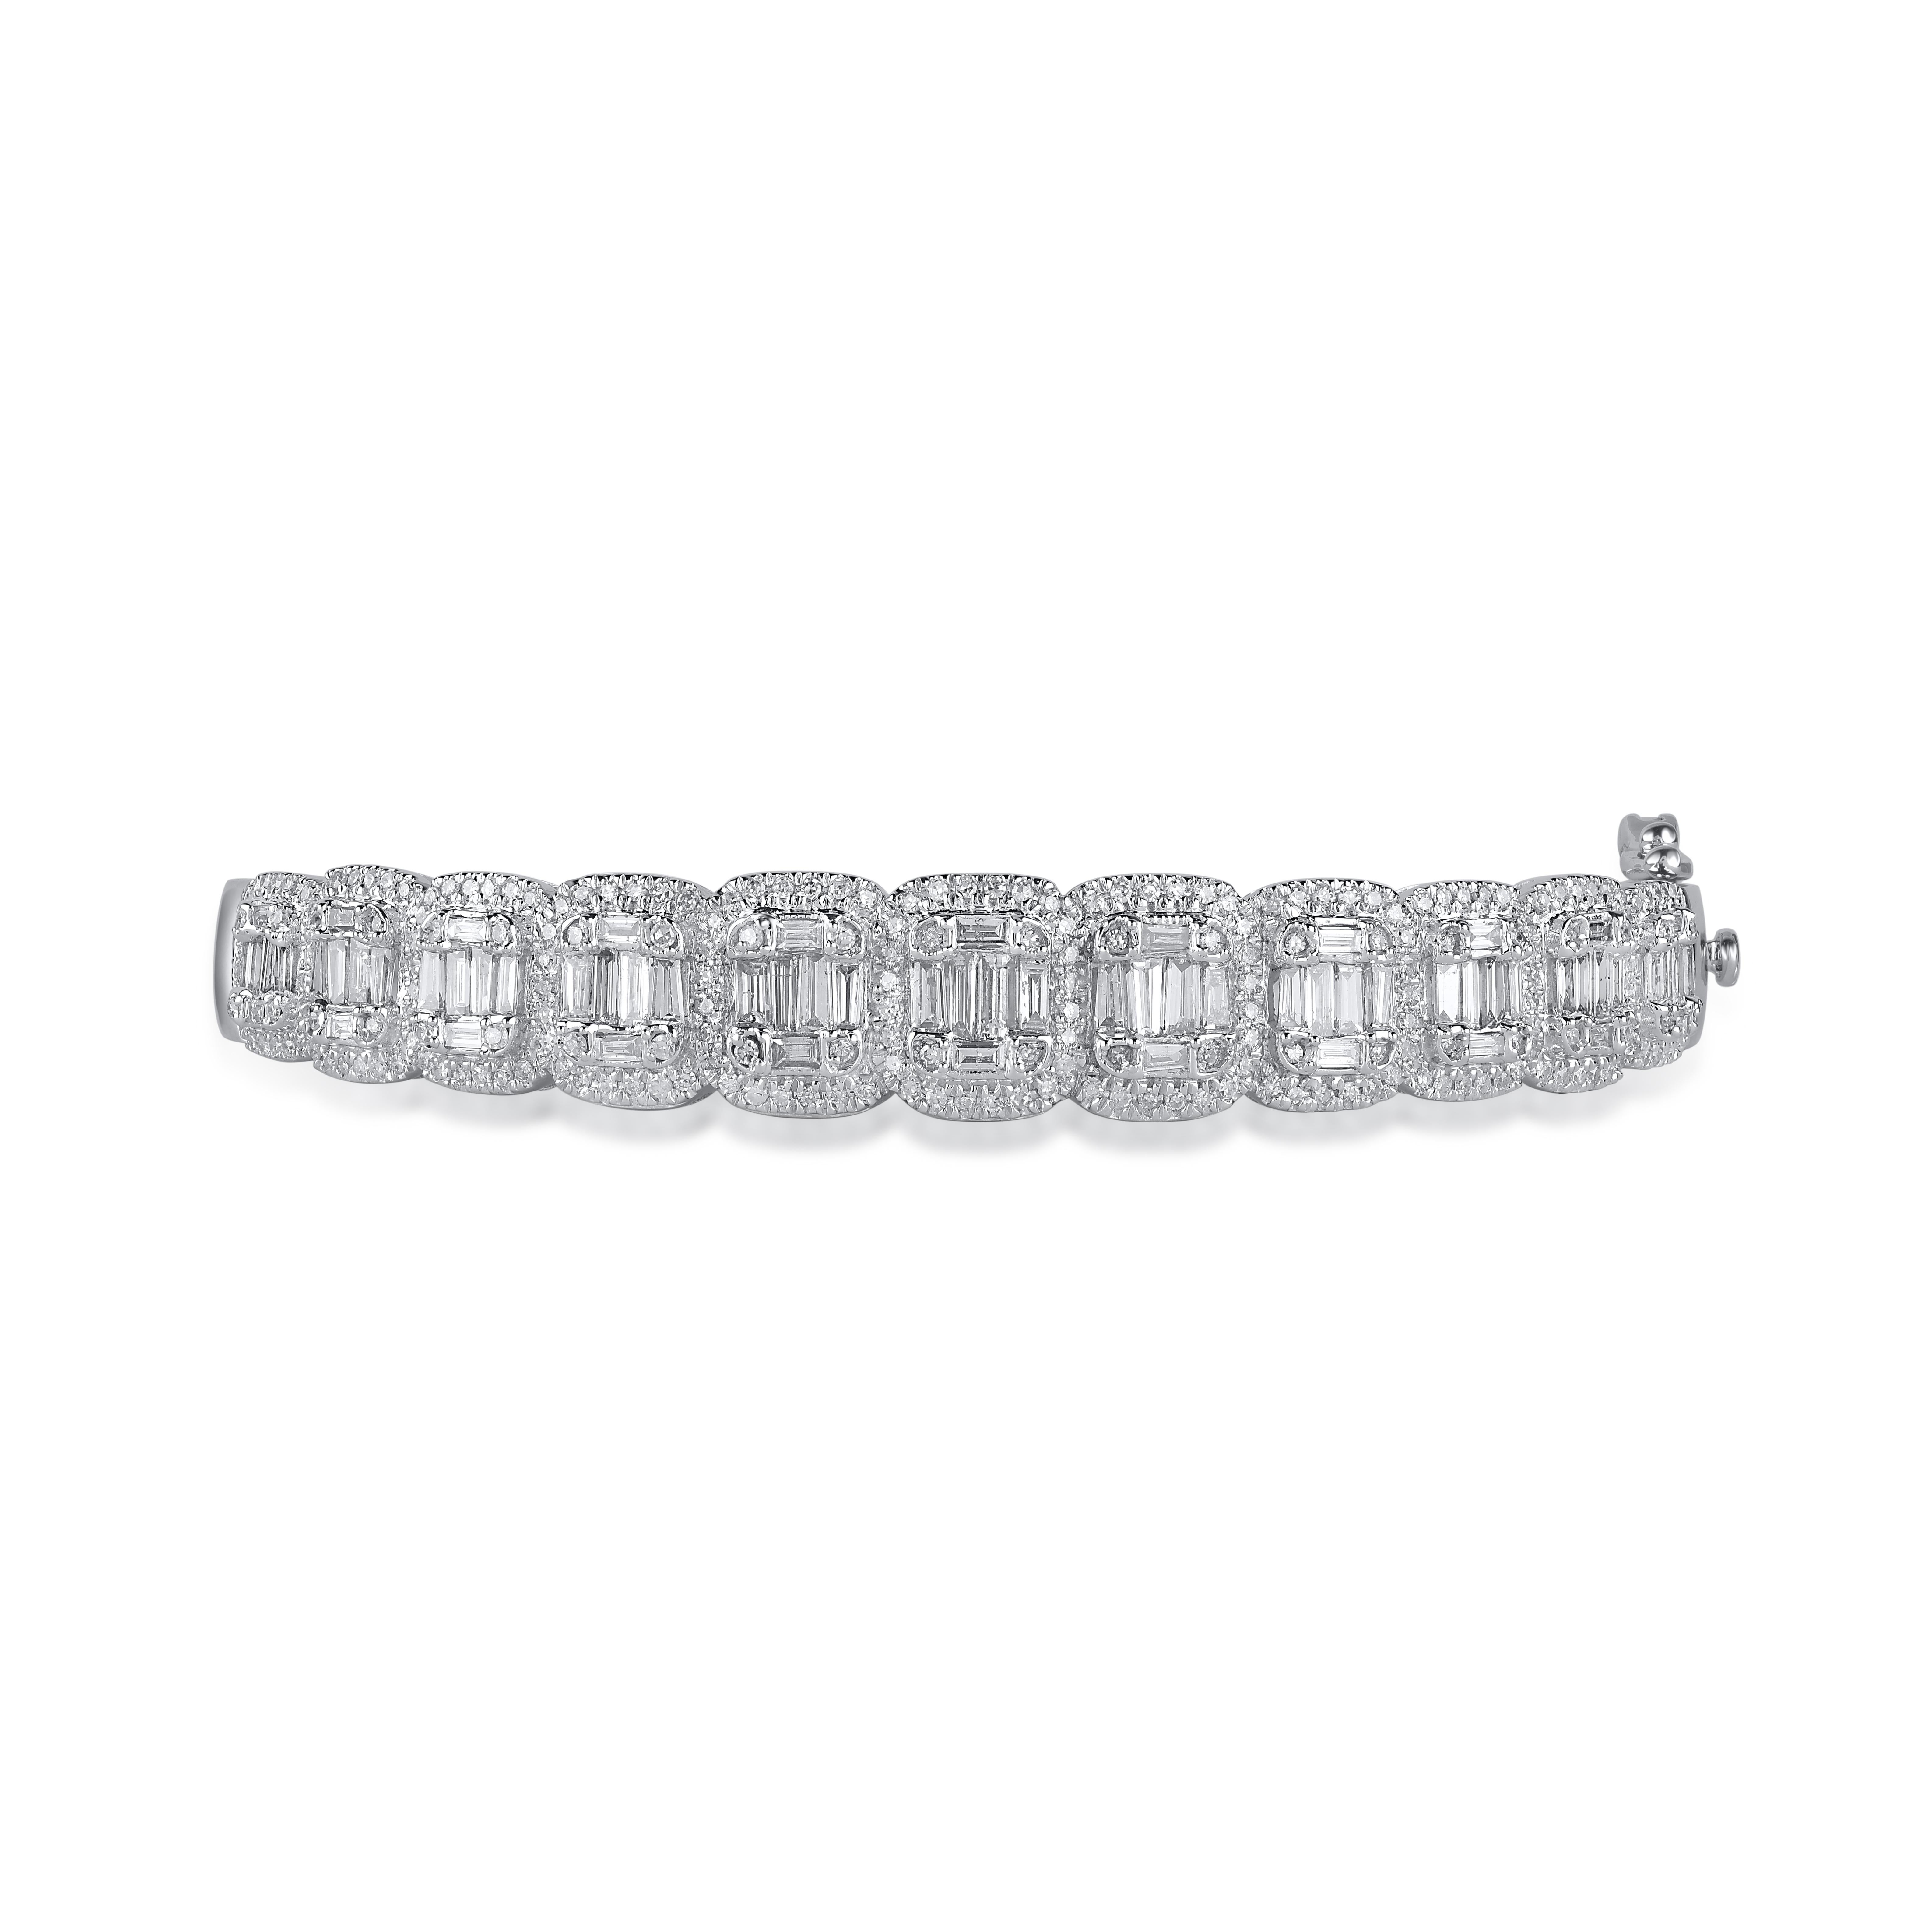 This Shimmering bangle features 312 round and baguette diamonds in pave and channel setting and crafted 14 kt white gold. 
The diamonds are graded Round (H-I Color, I2 Clarity) and Baguette (G-H Color, I1 Clarity) Make you look truly resplendent